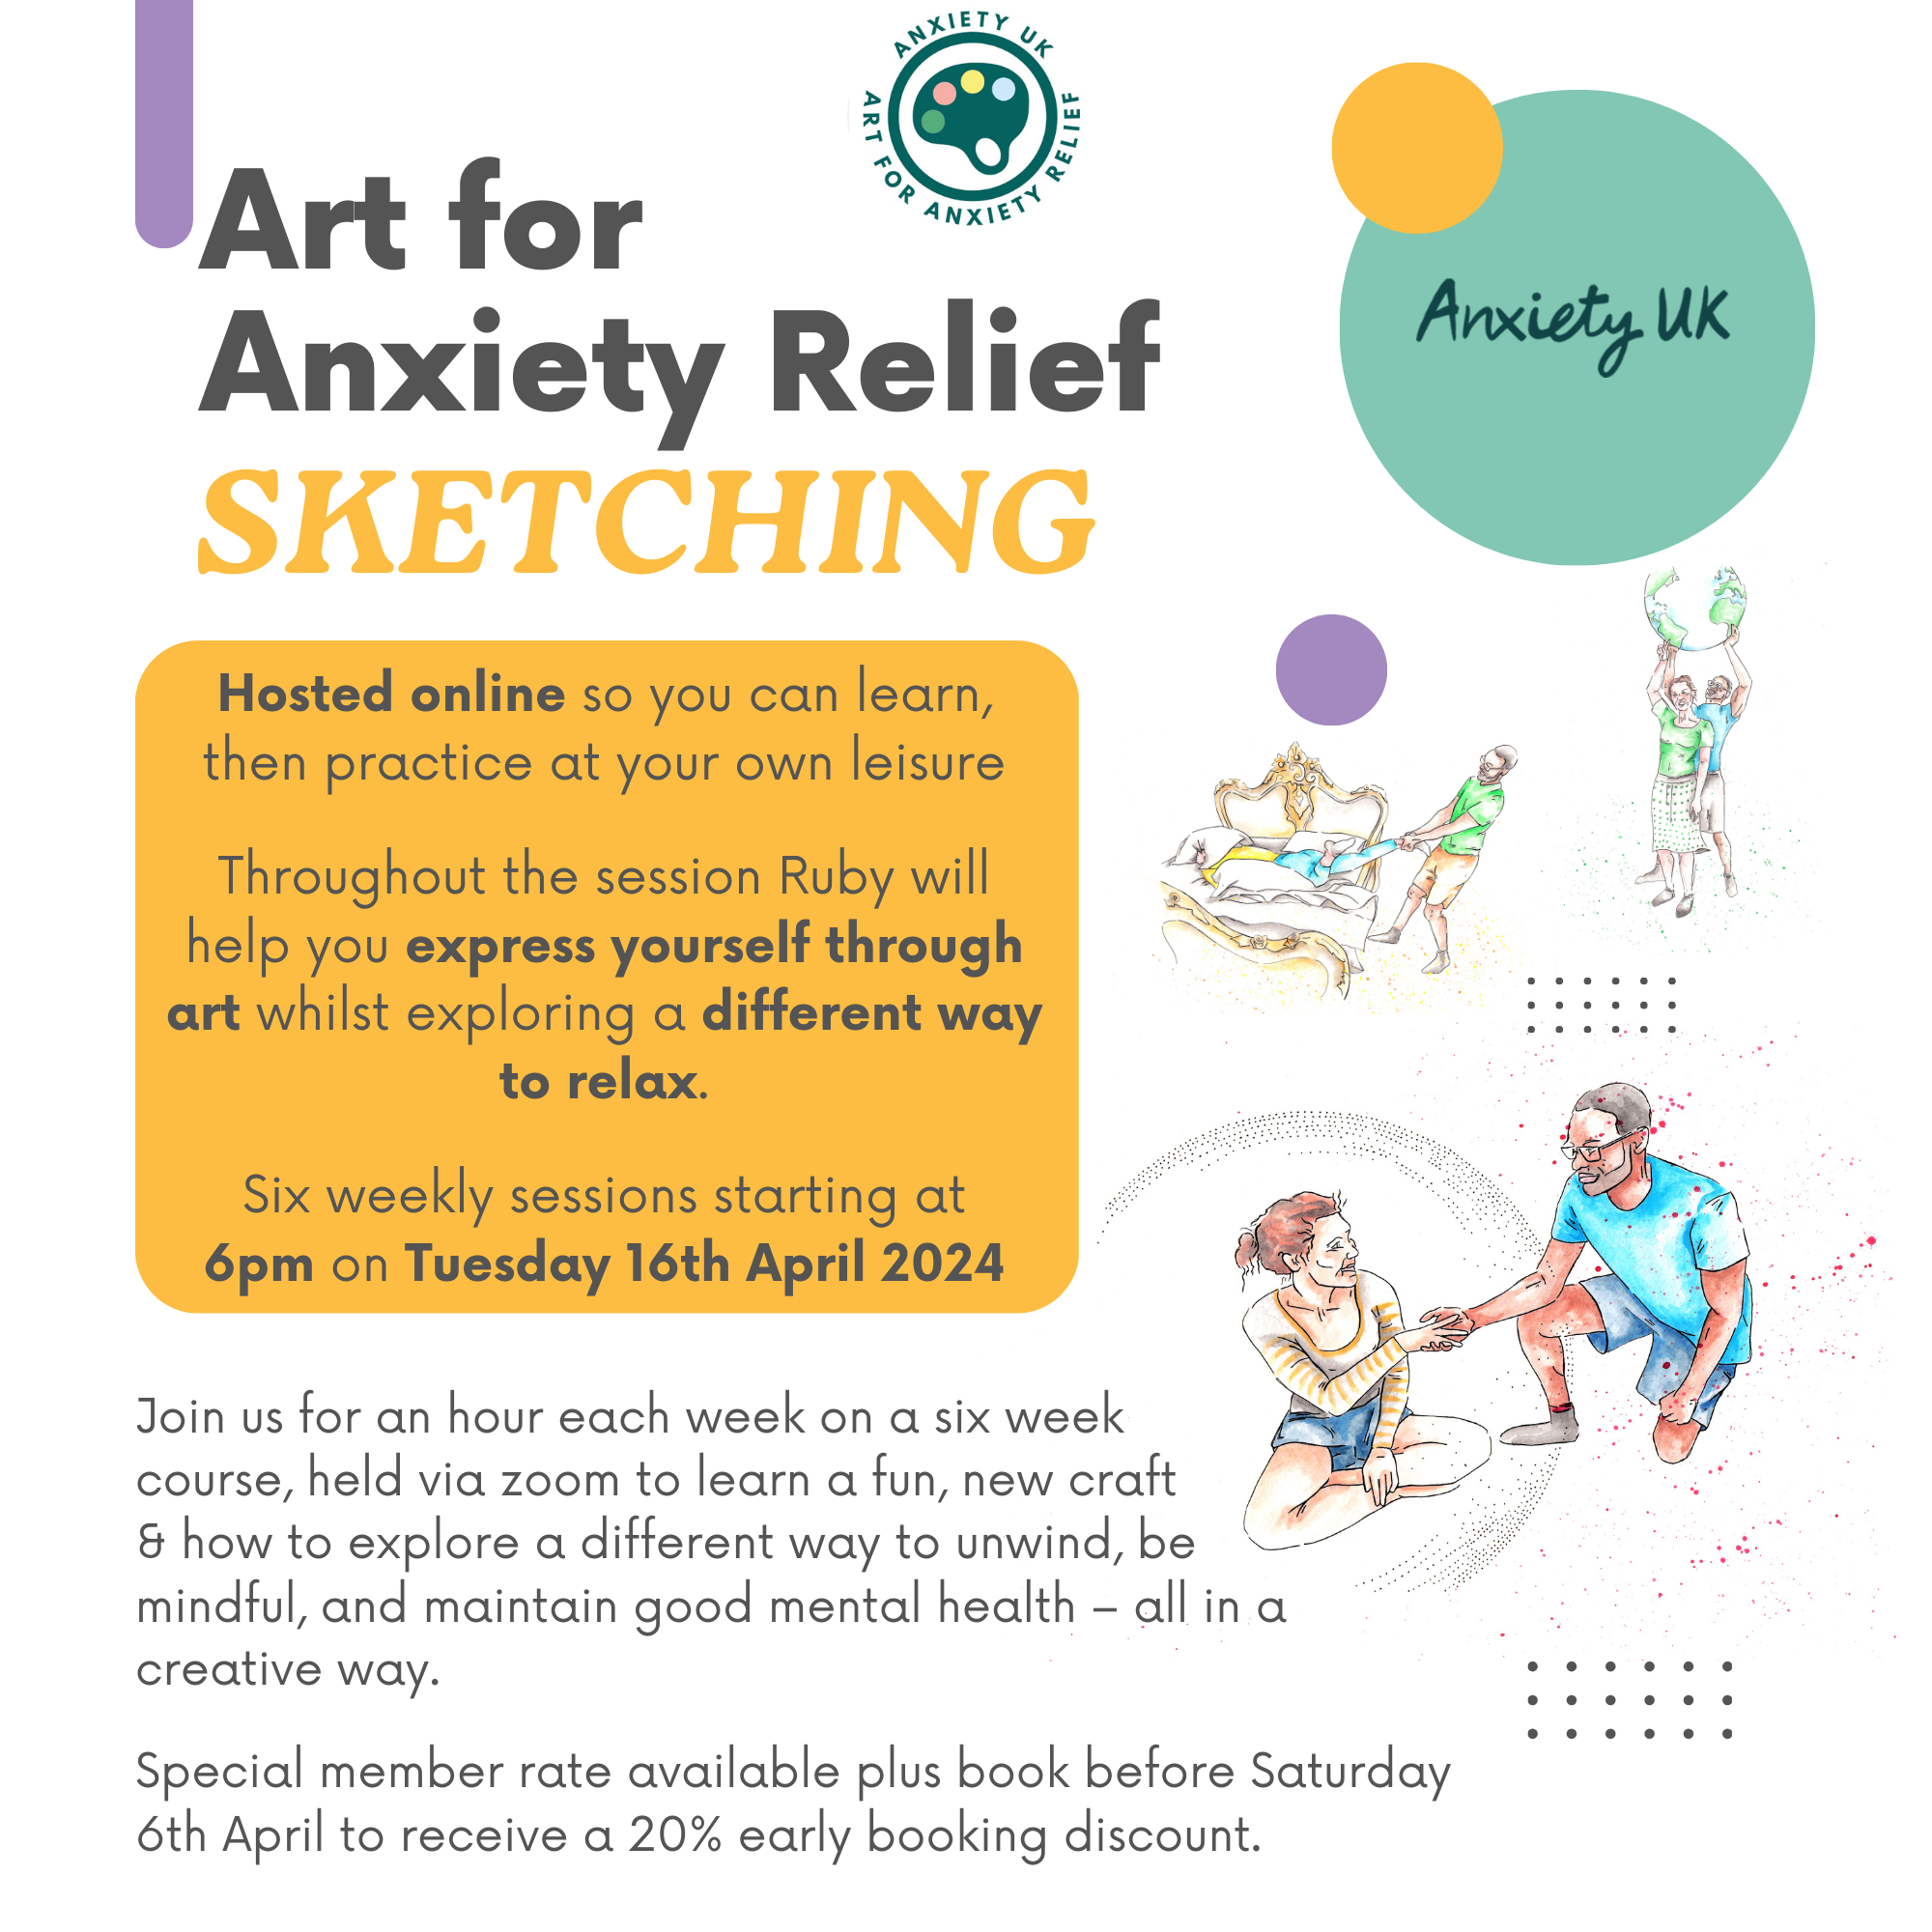 Art for anxiety relief (AFAR) group - Anxiety UK